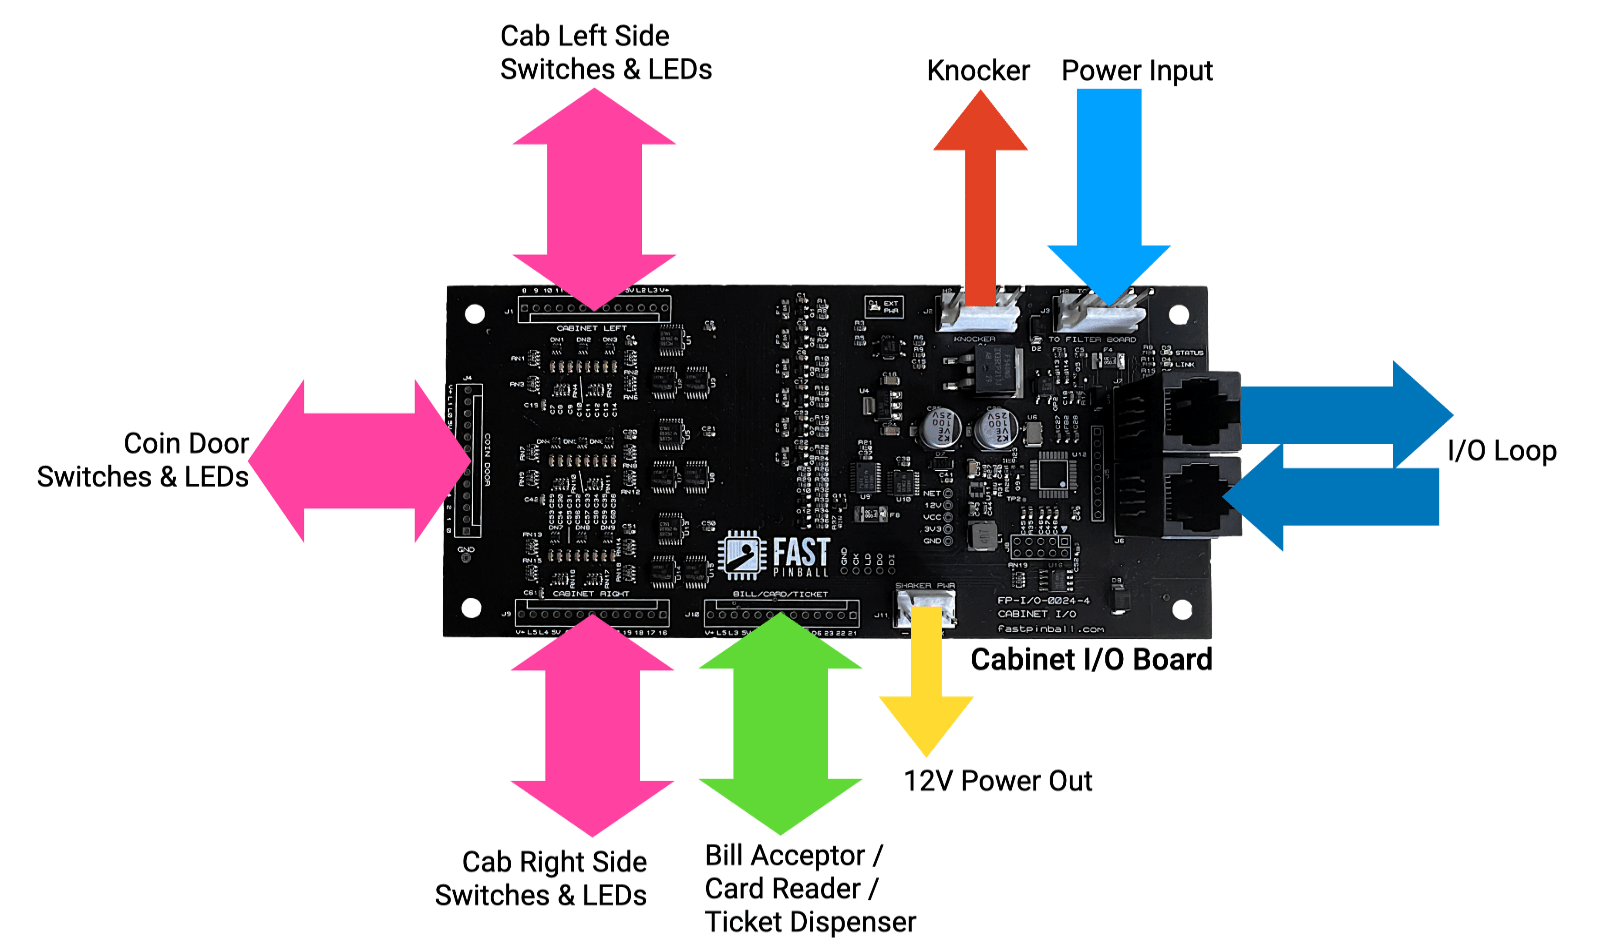 Cabinet I/O board features